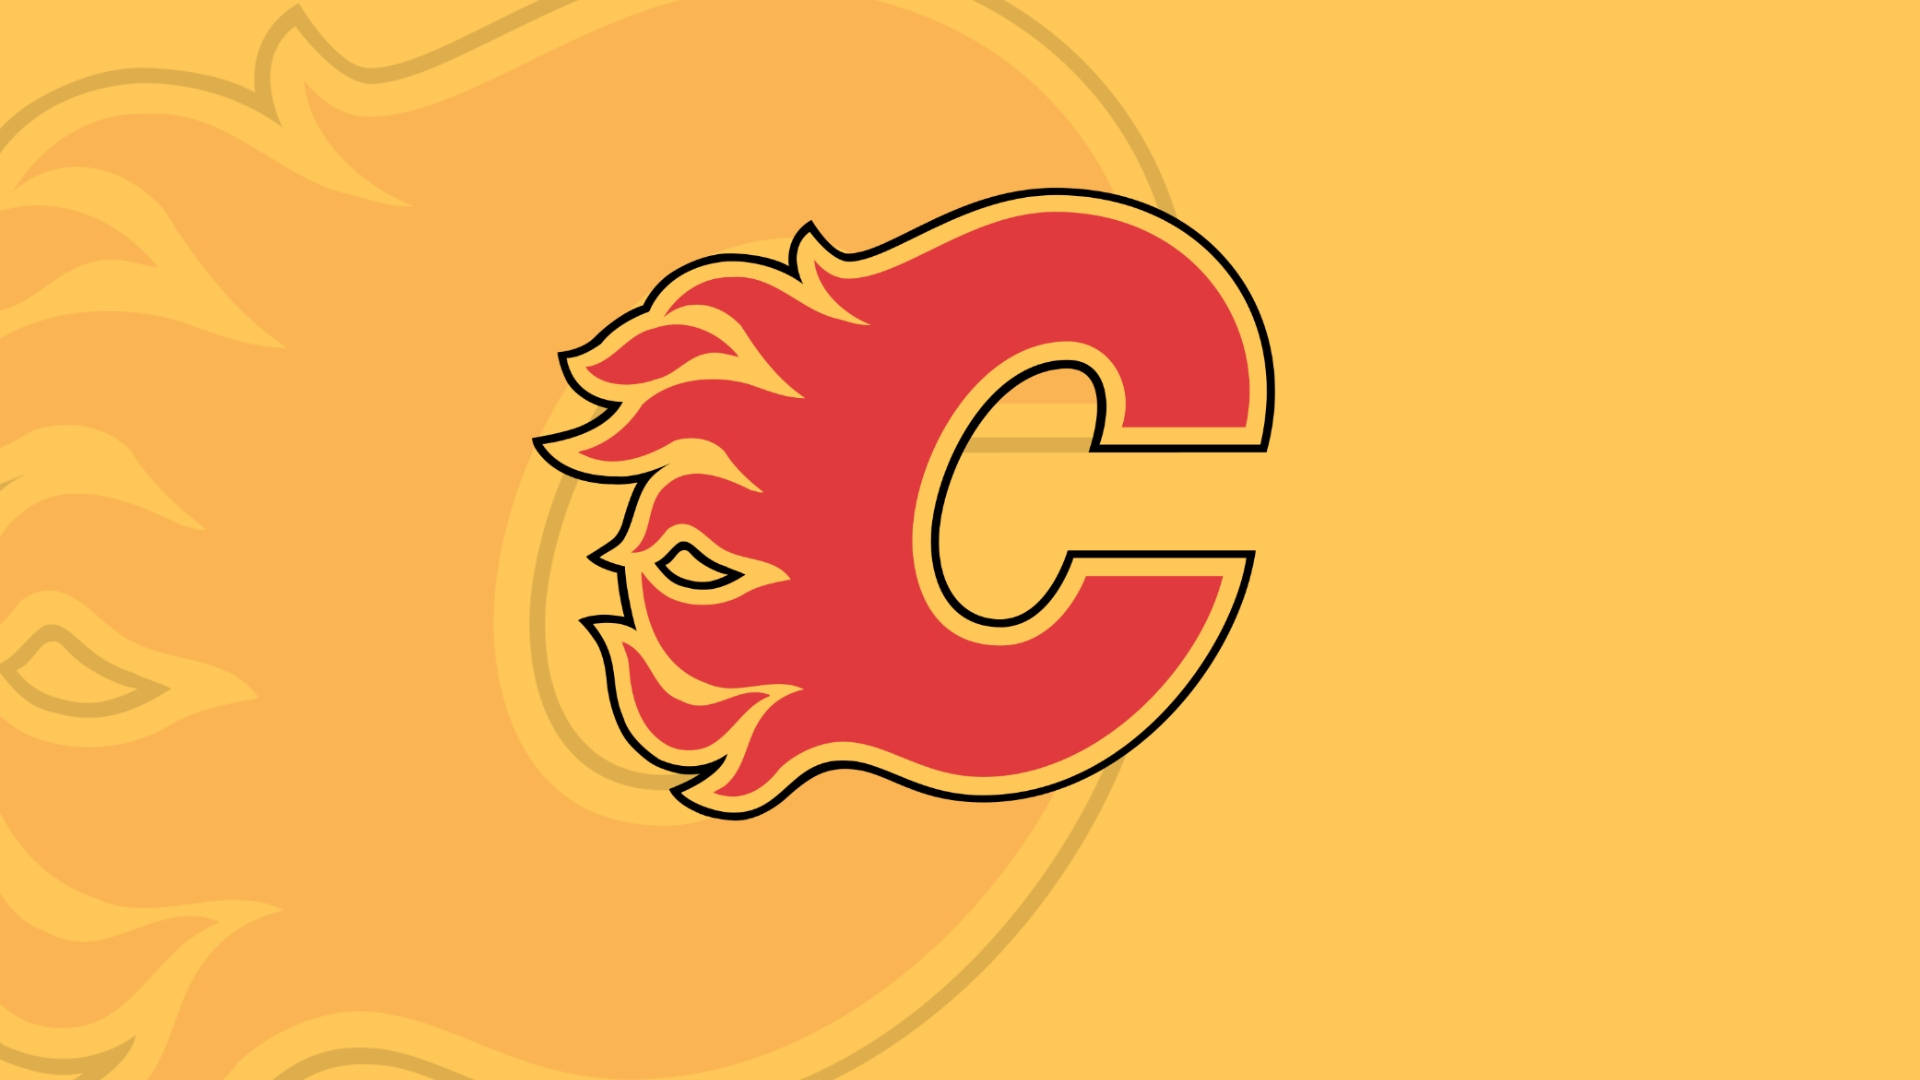 Vibrant Calgary Flames logo in intense yellow and red Wallpaper